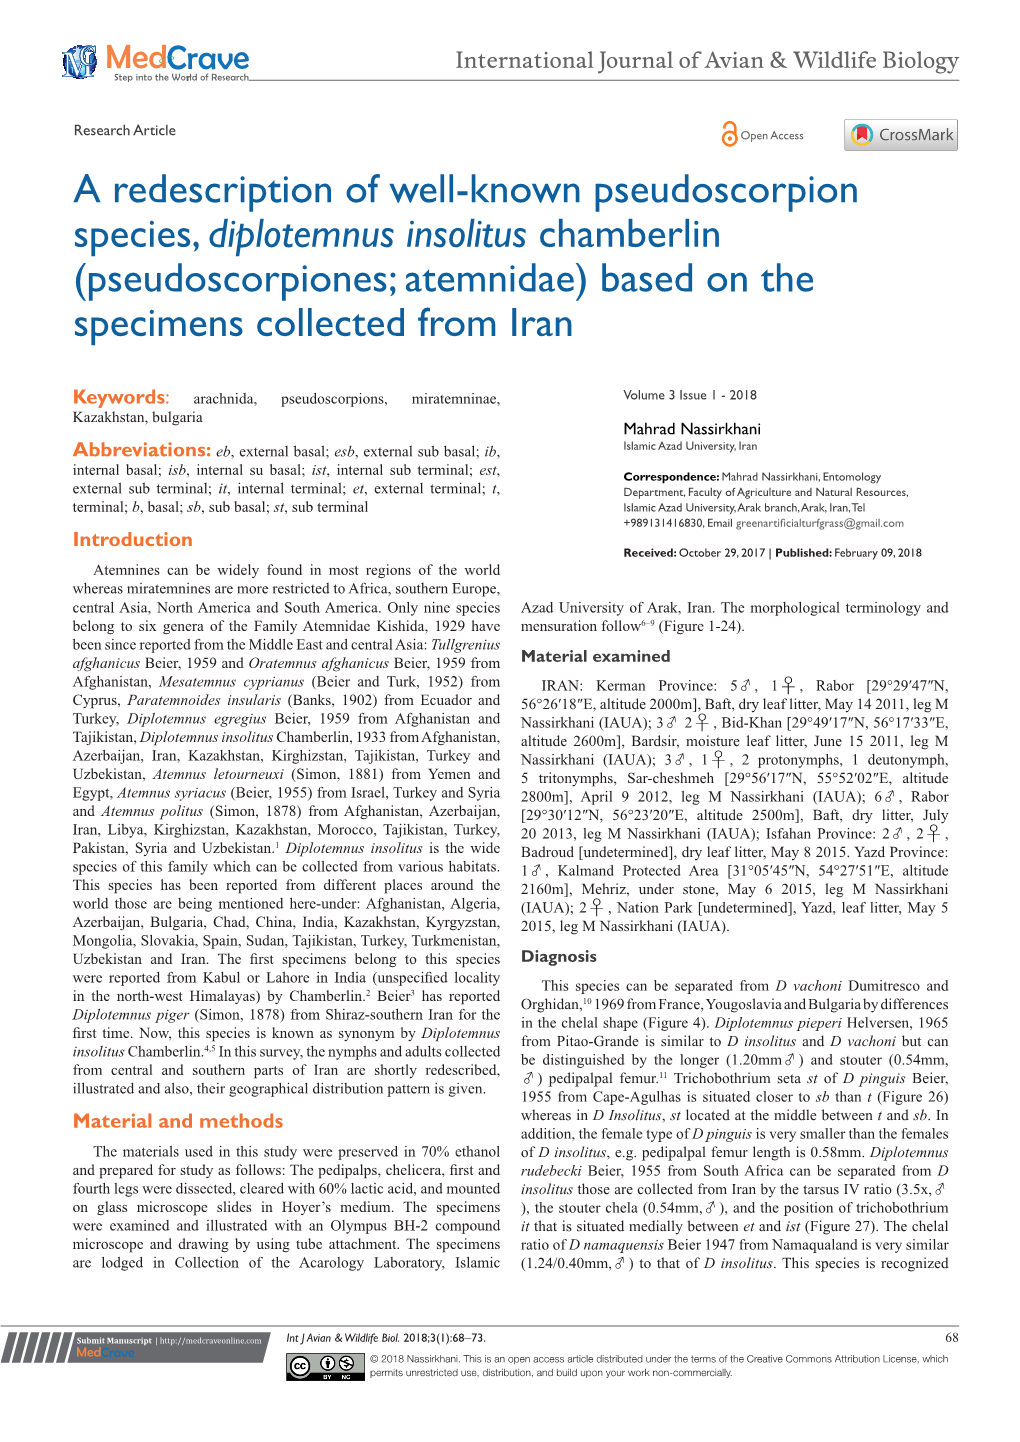 A Redescription of Well-Known Pseudoscorpion Species, Diplotemnus Insolitus Chamberlin (Pseudoscorpiones; Atemnidae) Based on the Specimens Collected from Iran